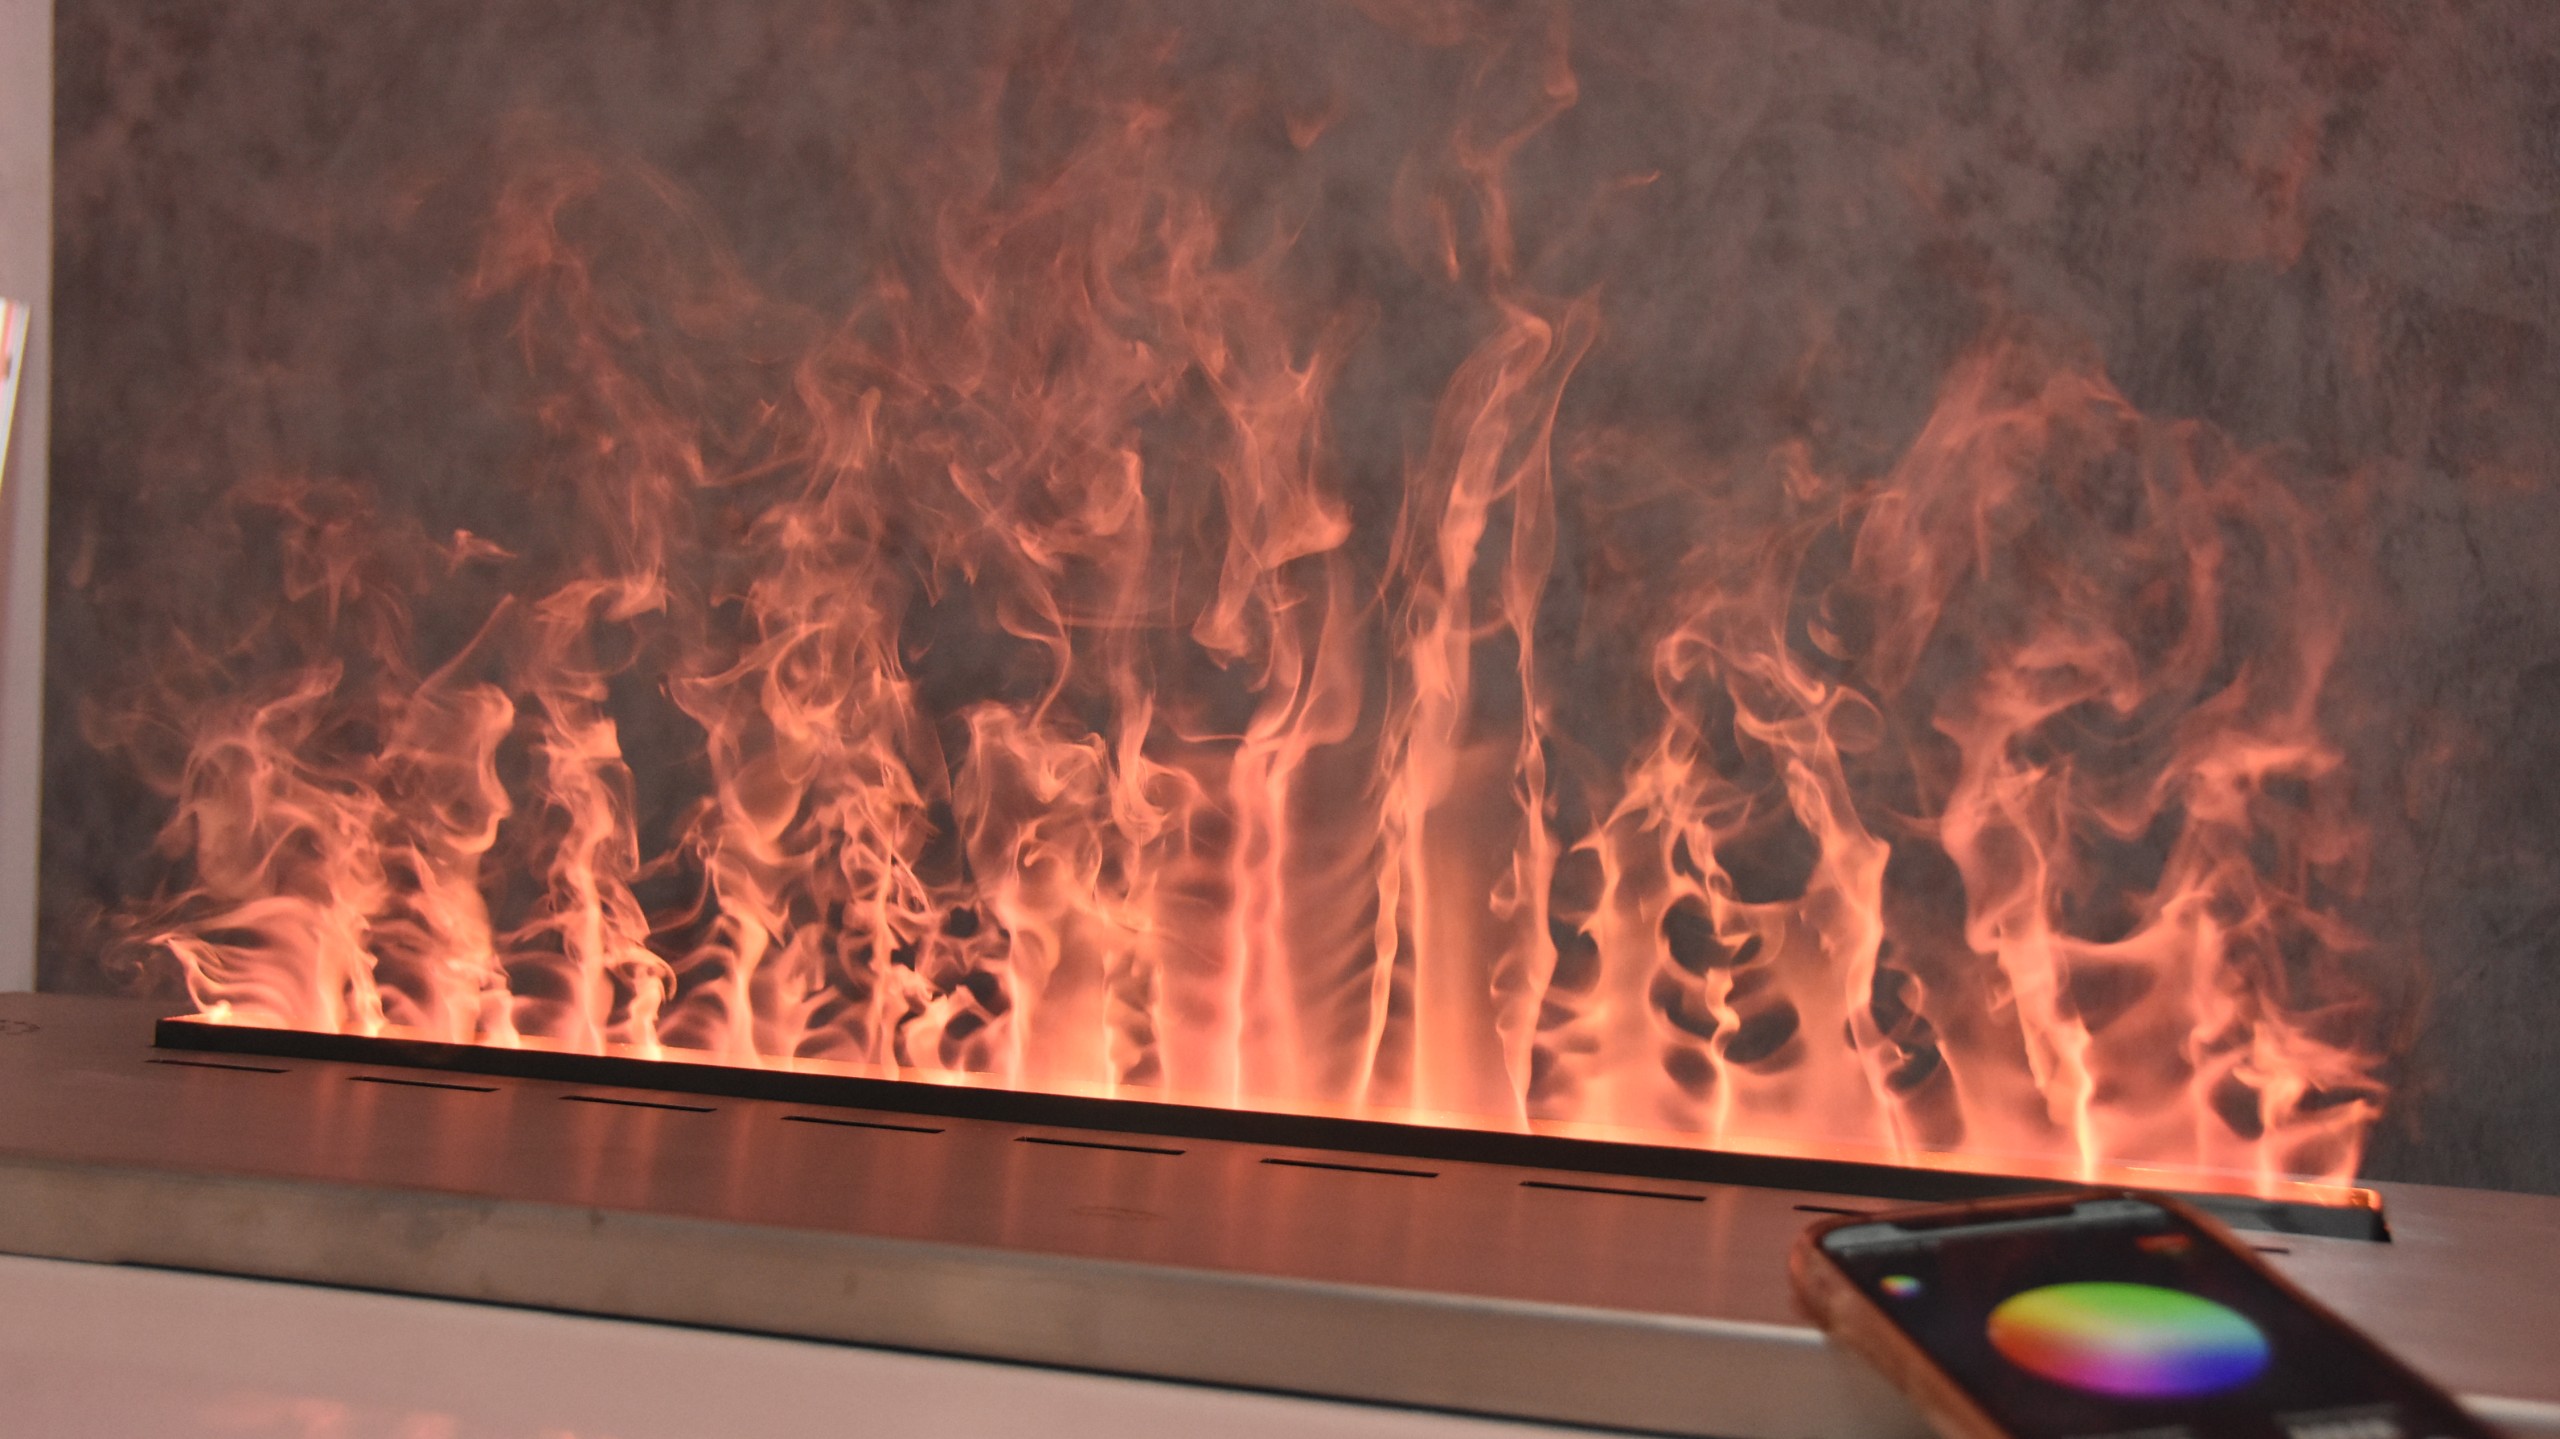 Decorative electric water vapor fireplace brings light to your home-Art-fire